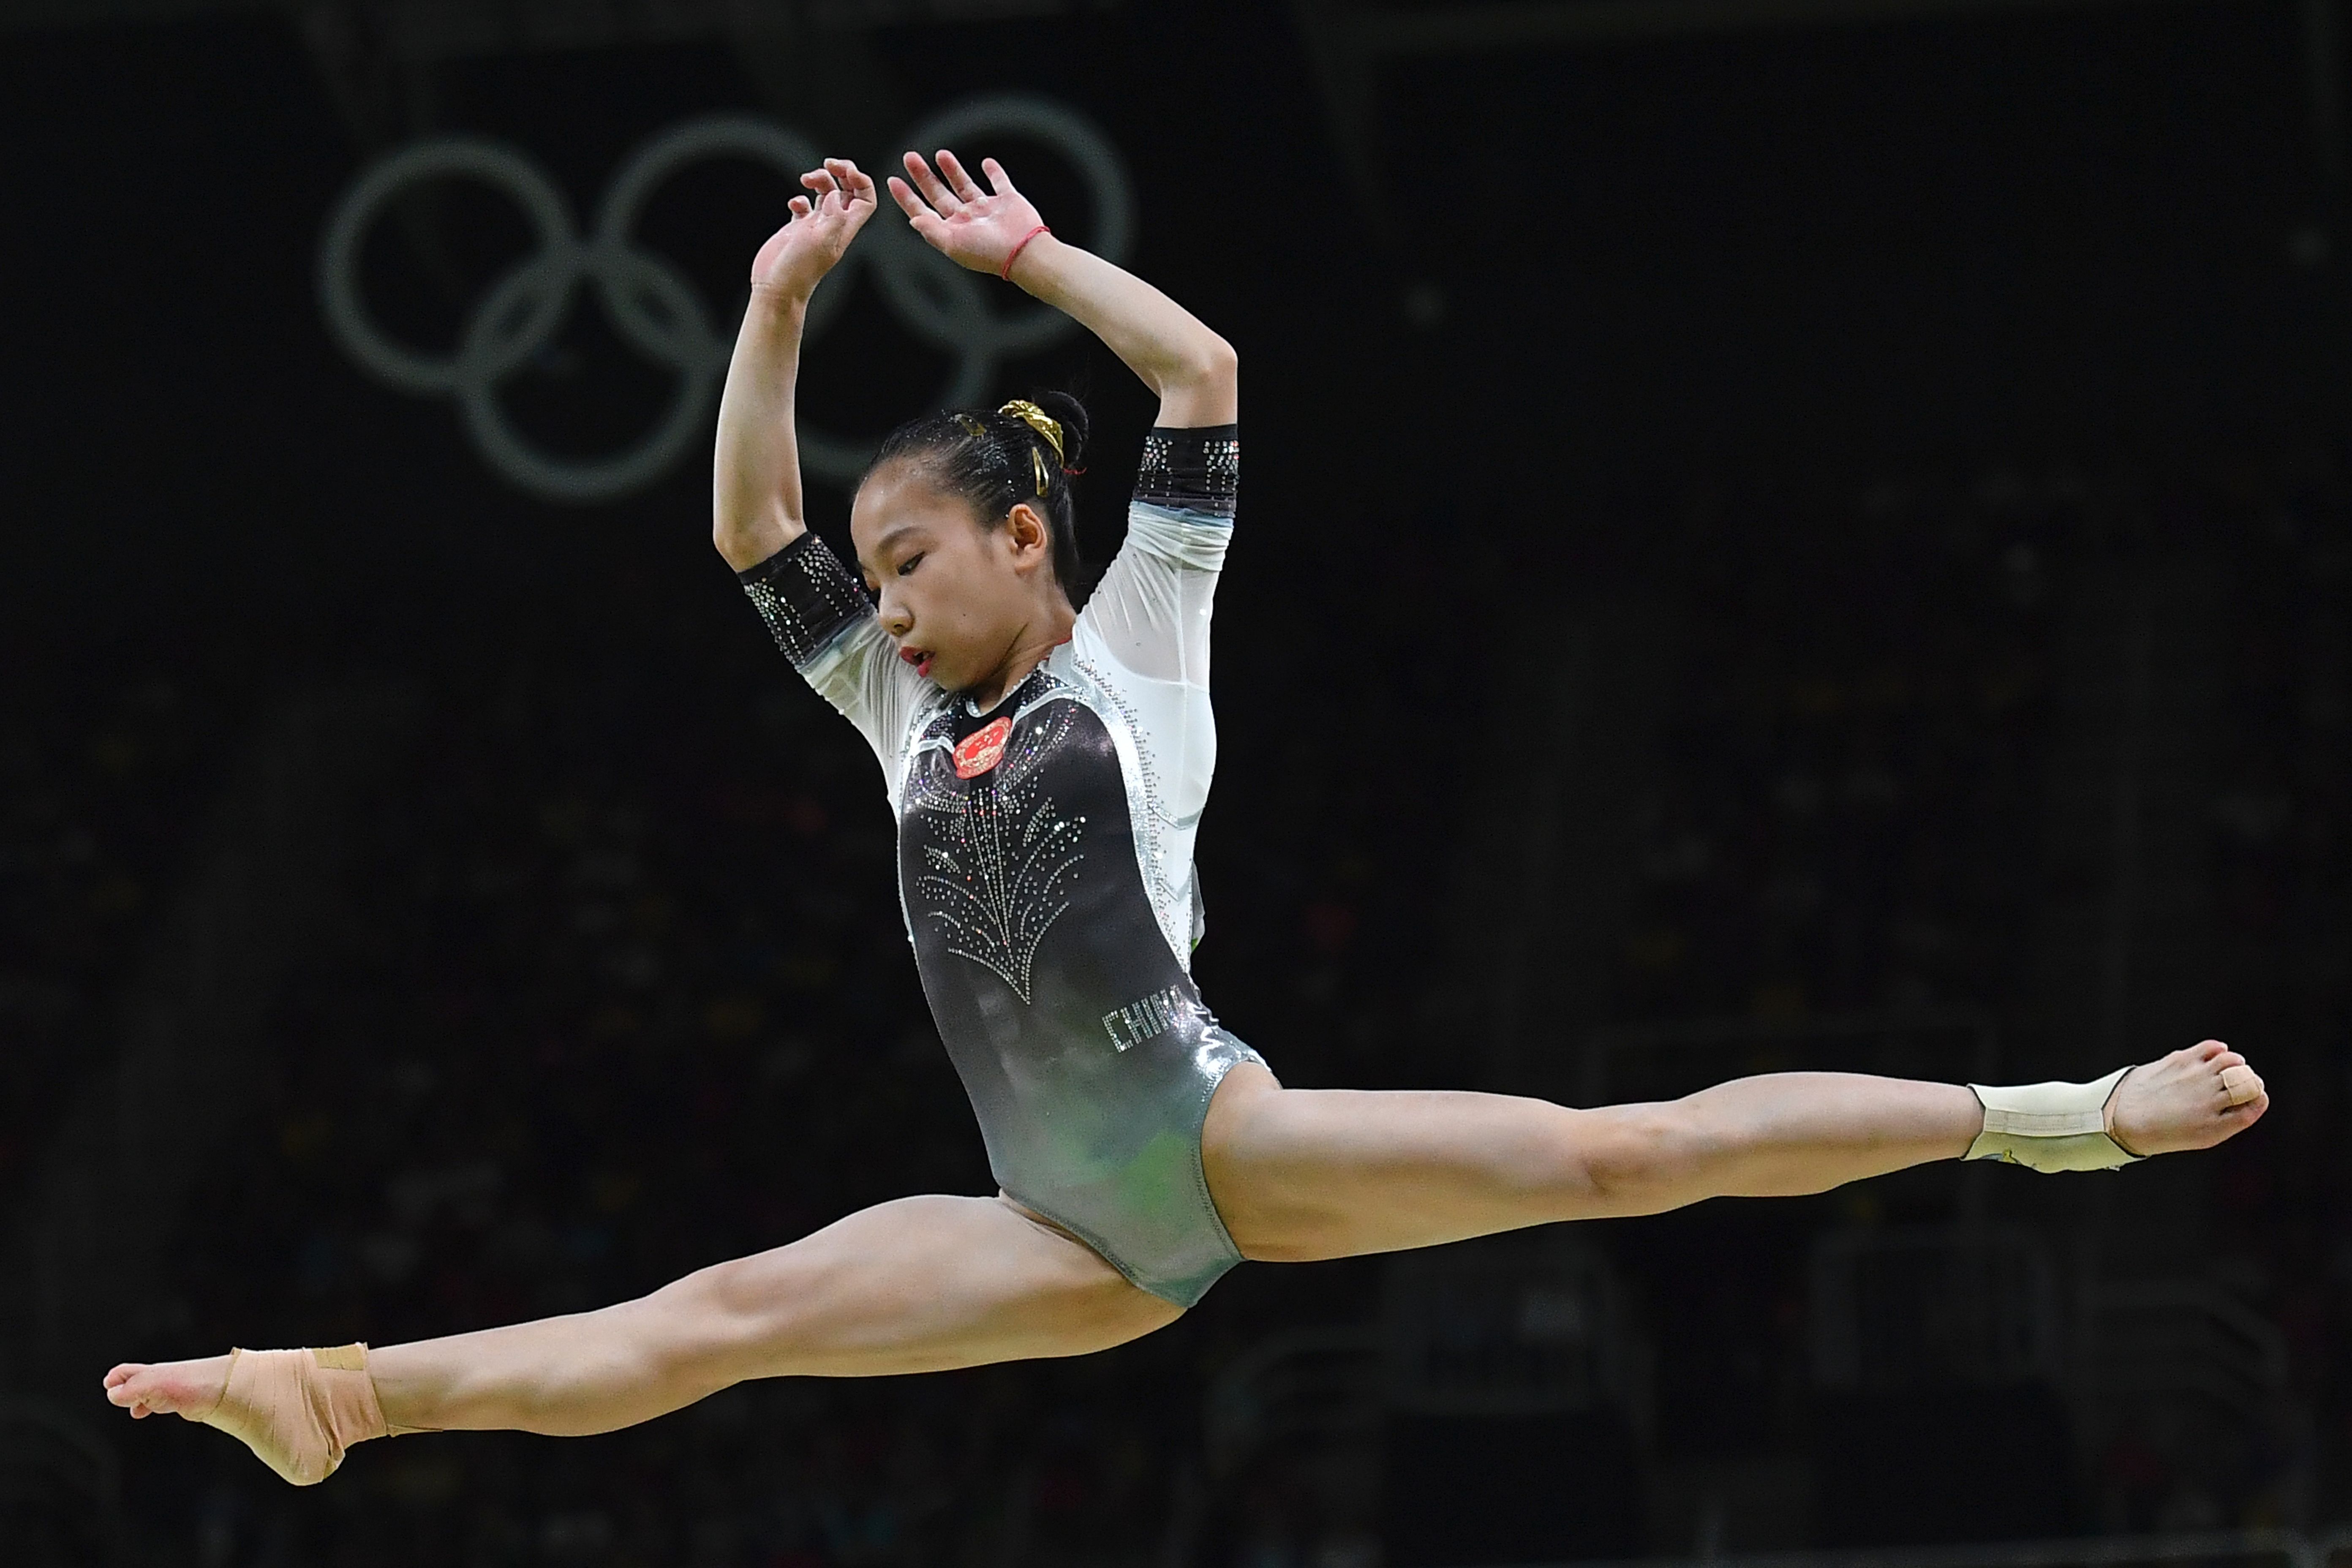 Wang Yan, The Chinese Gymnastics Team's Youngest Competitor, Deserves